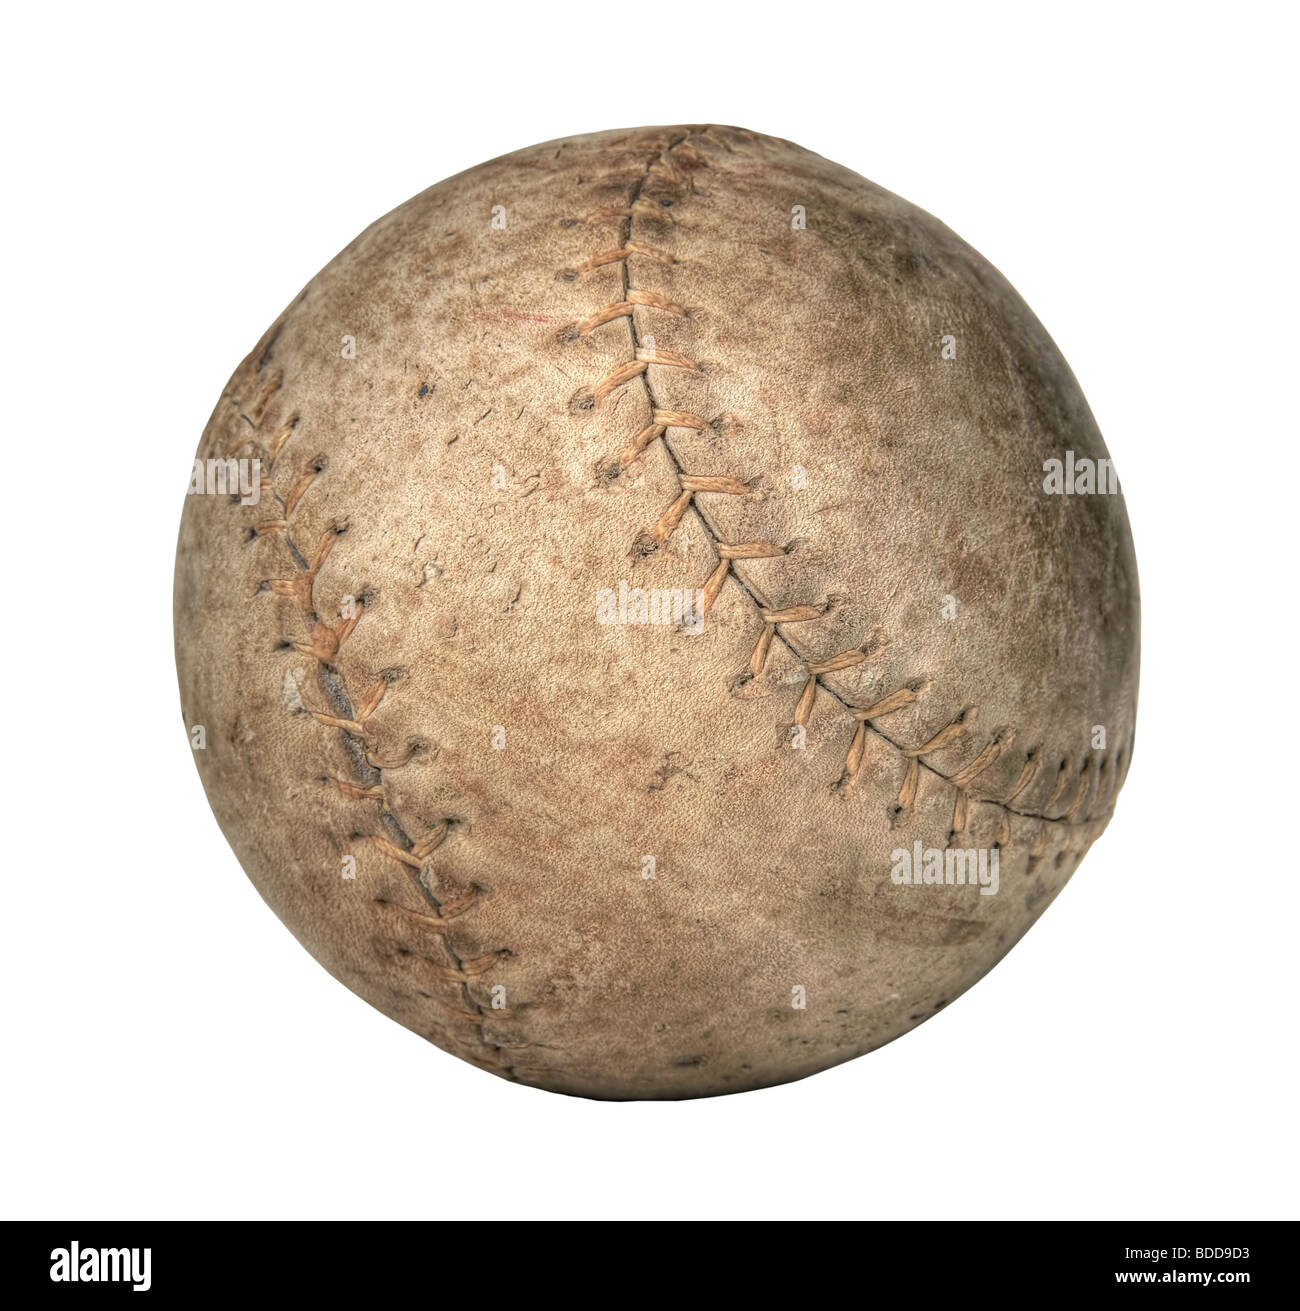 Grunge old softball isolated over a white background Stock Photo